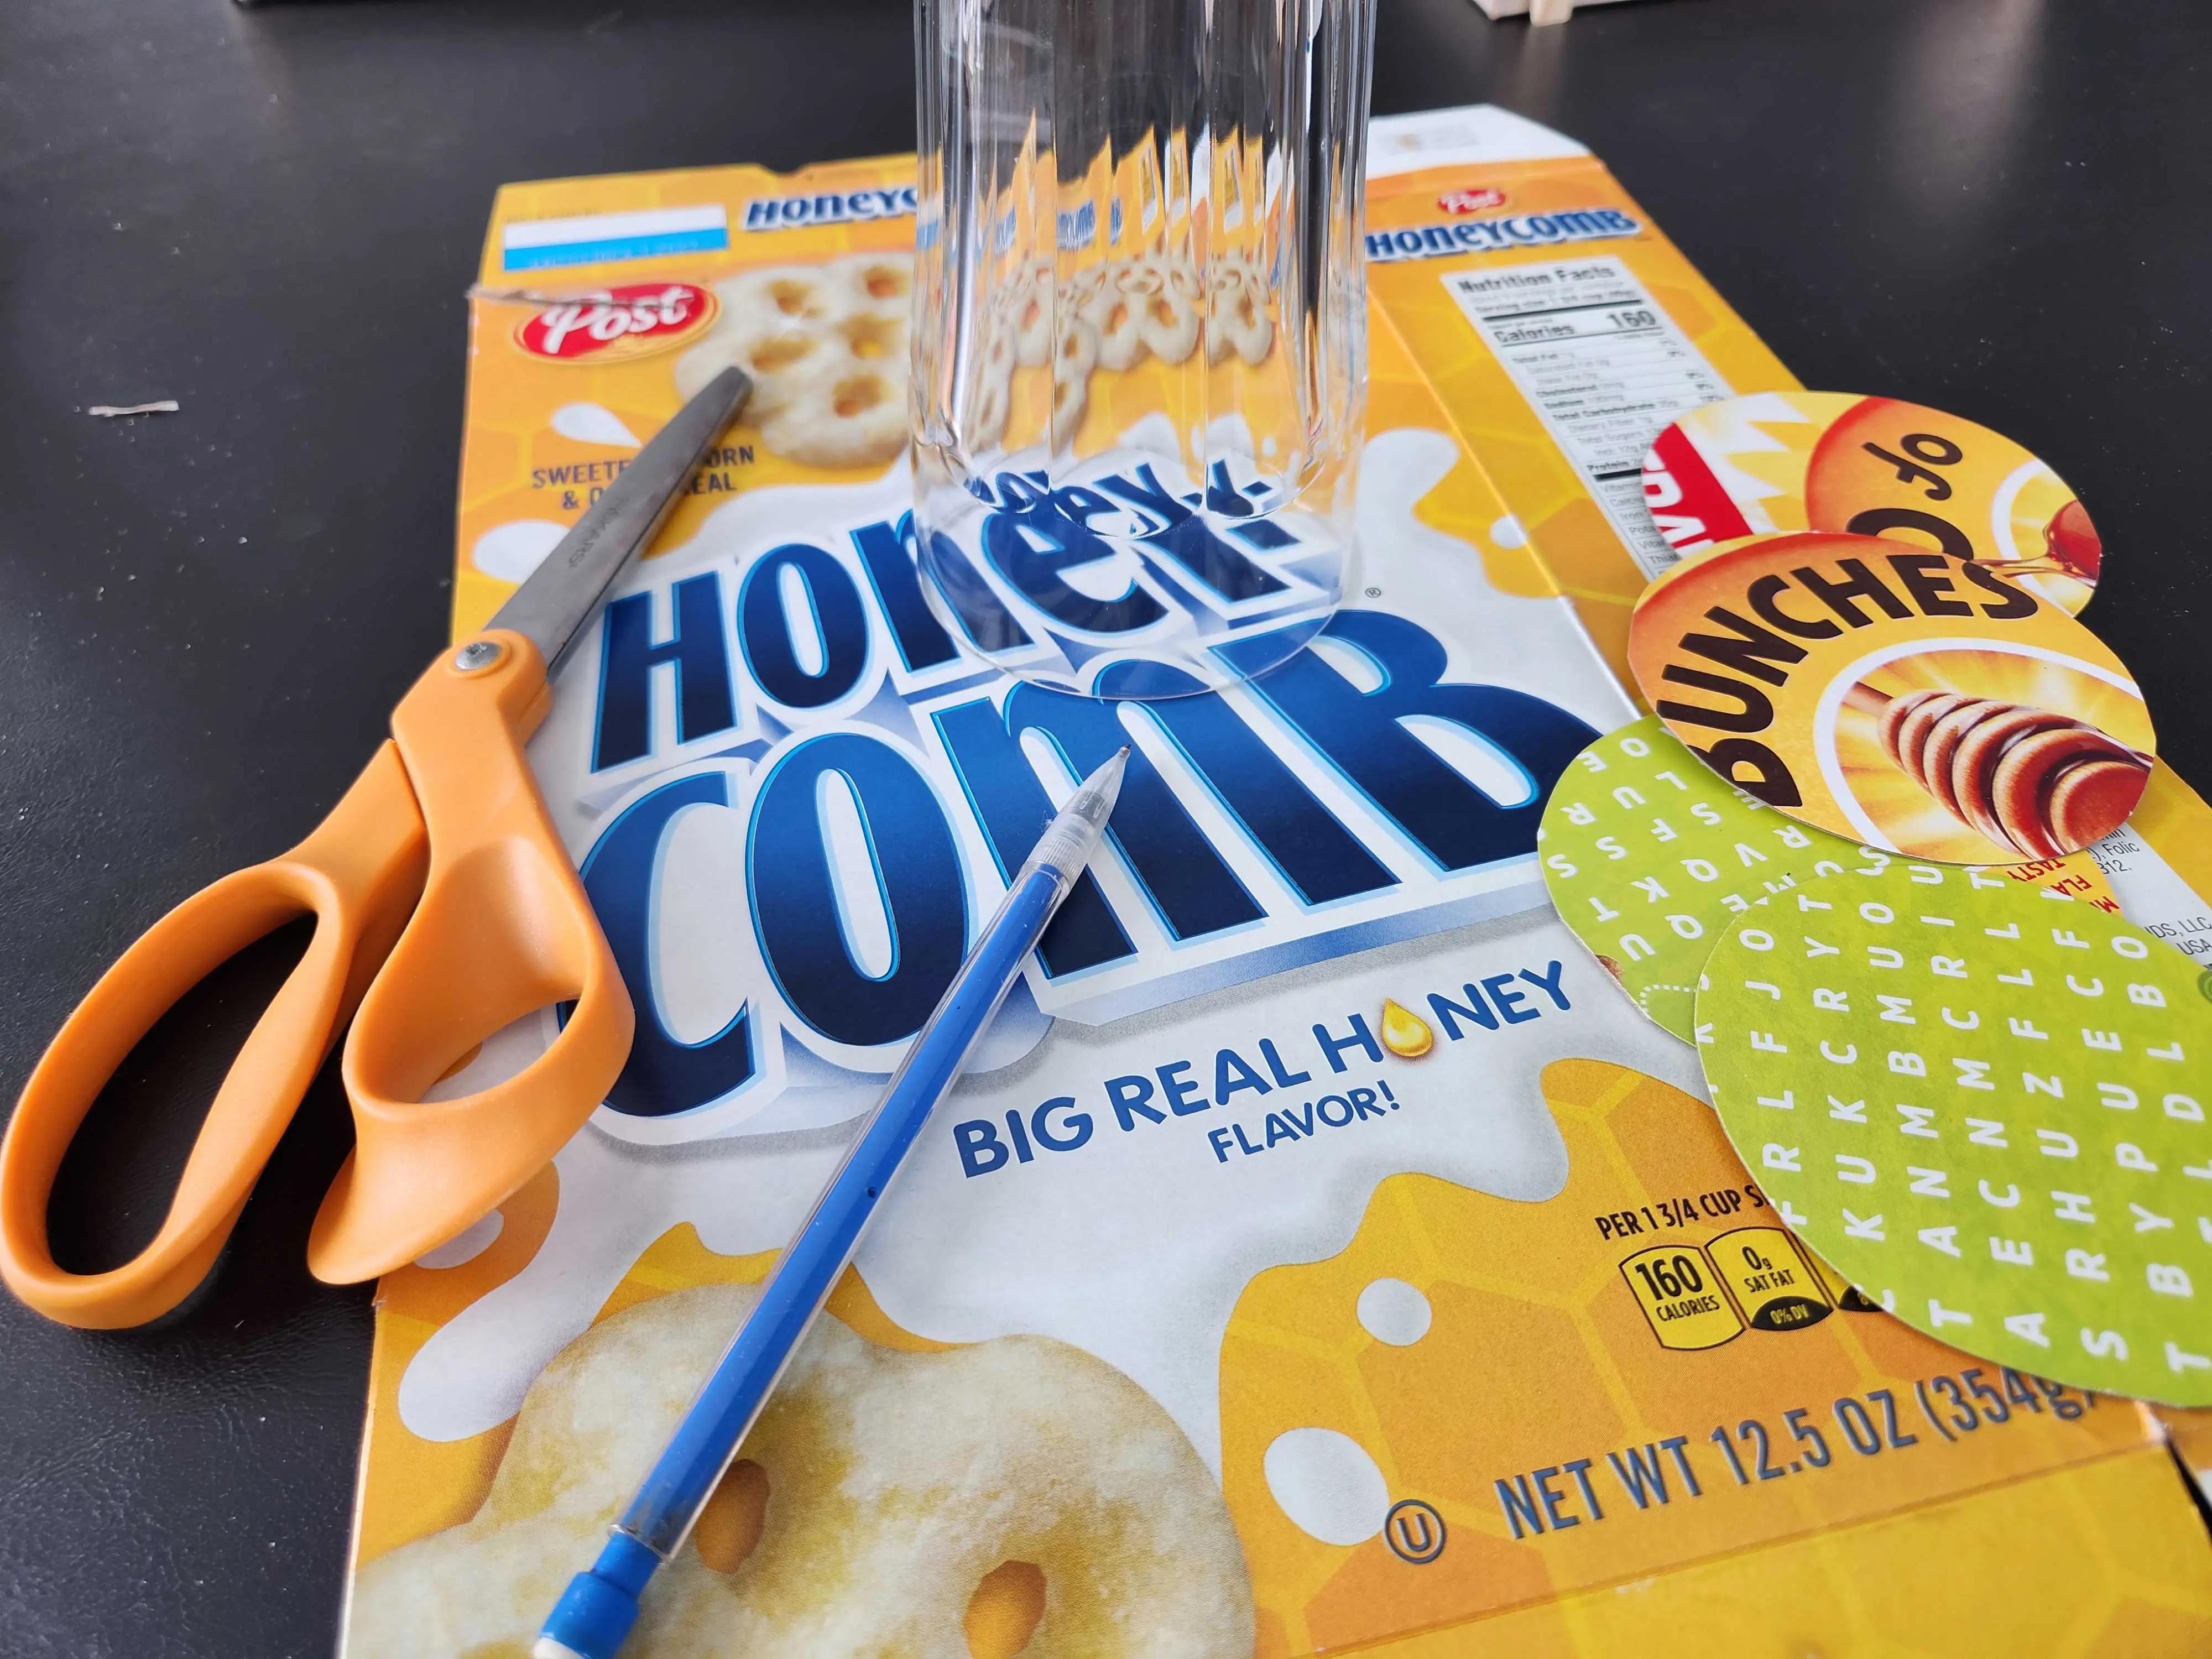 A close-up of a box of Honeycomb cereal with scissors, a glass and a pen on it.